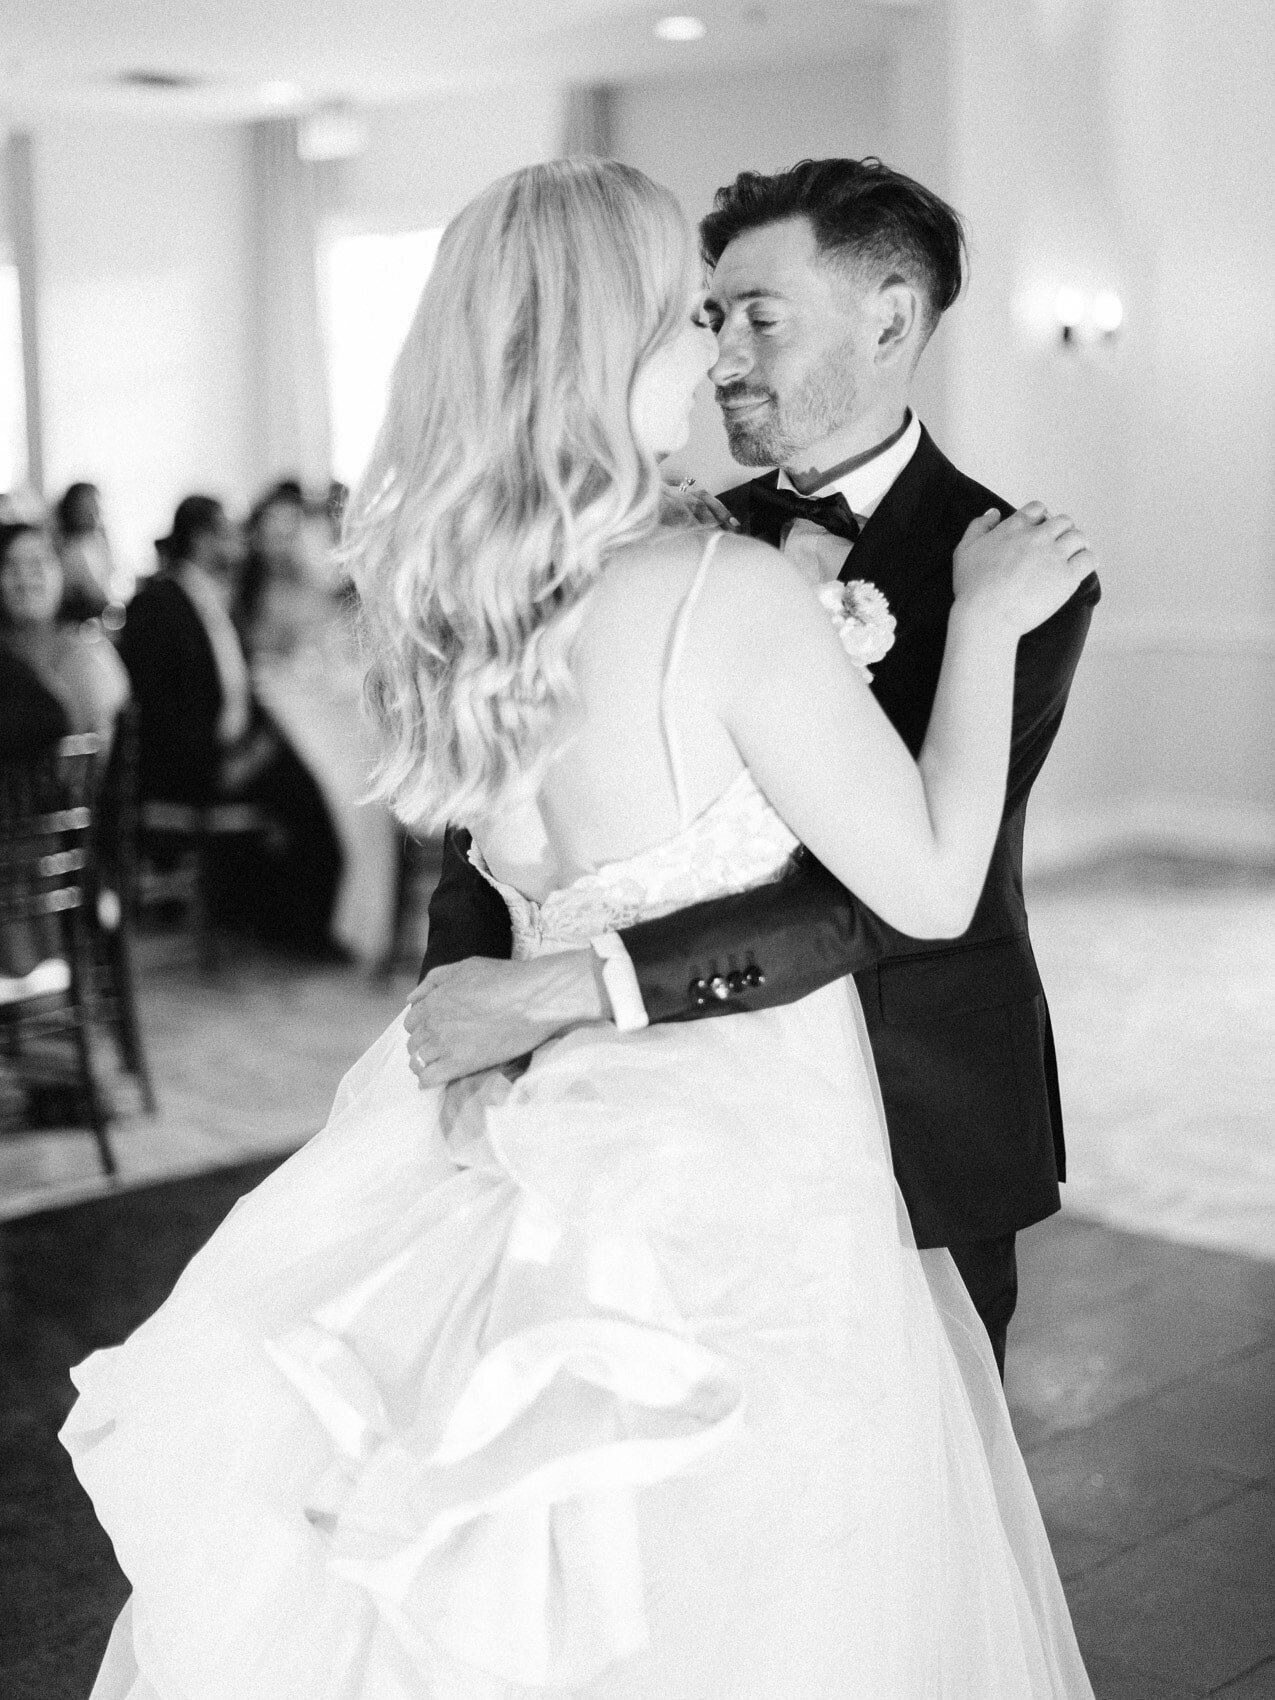 bride and groom's candid first dance at their wedding reception at windermere house muskoka